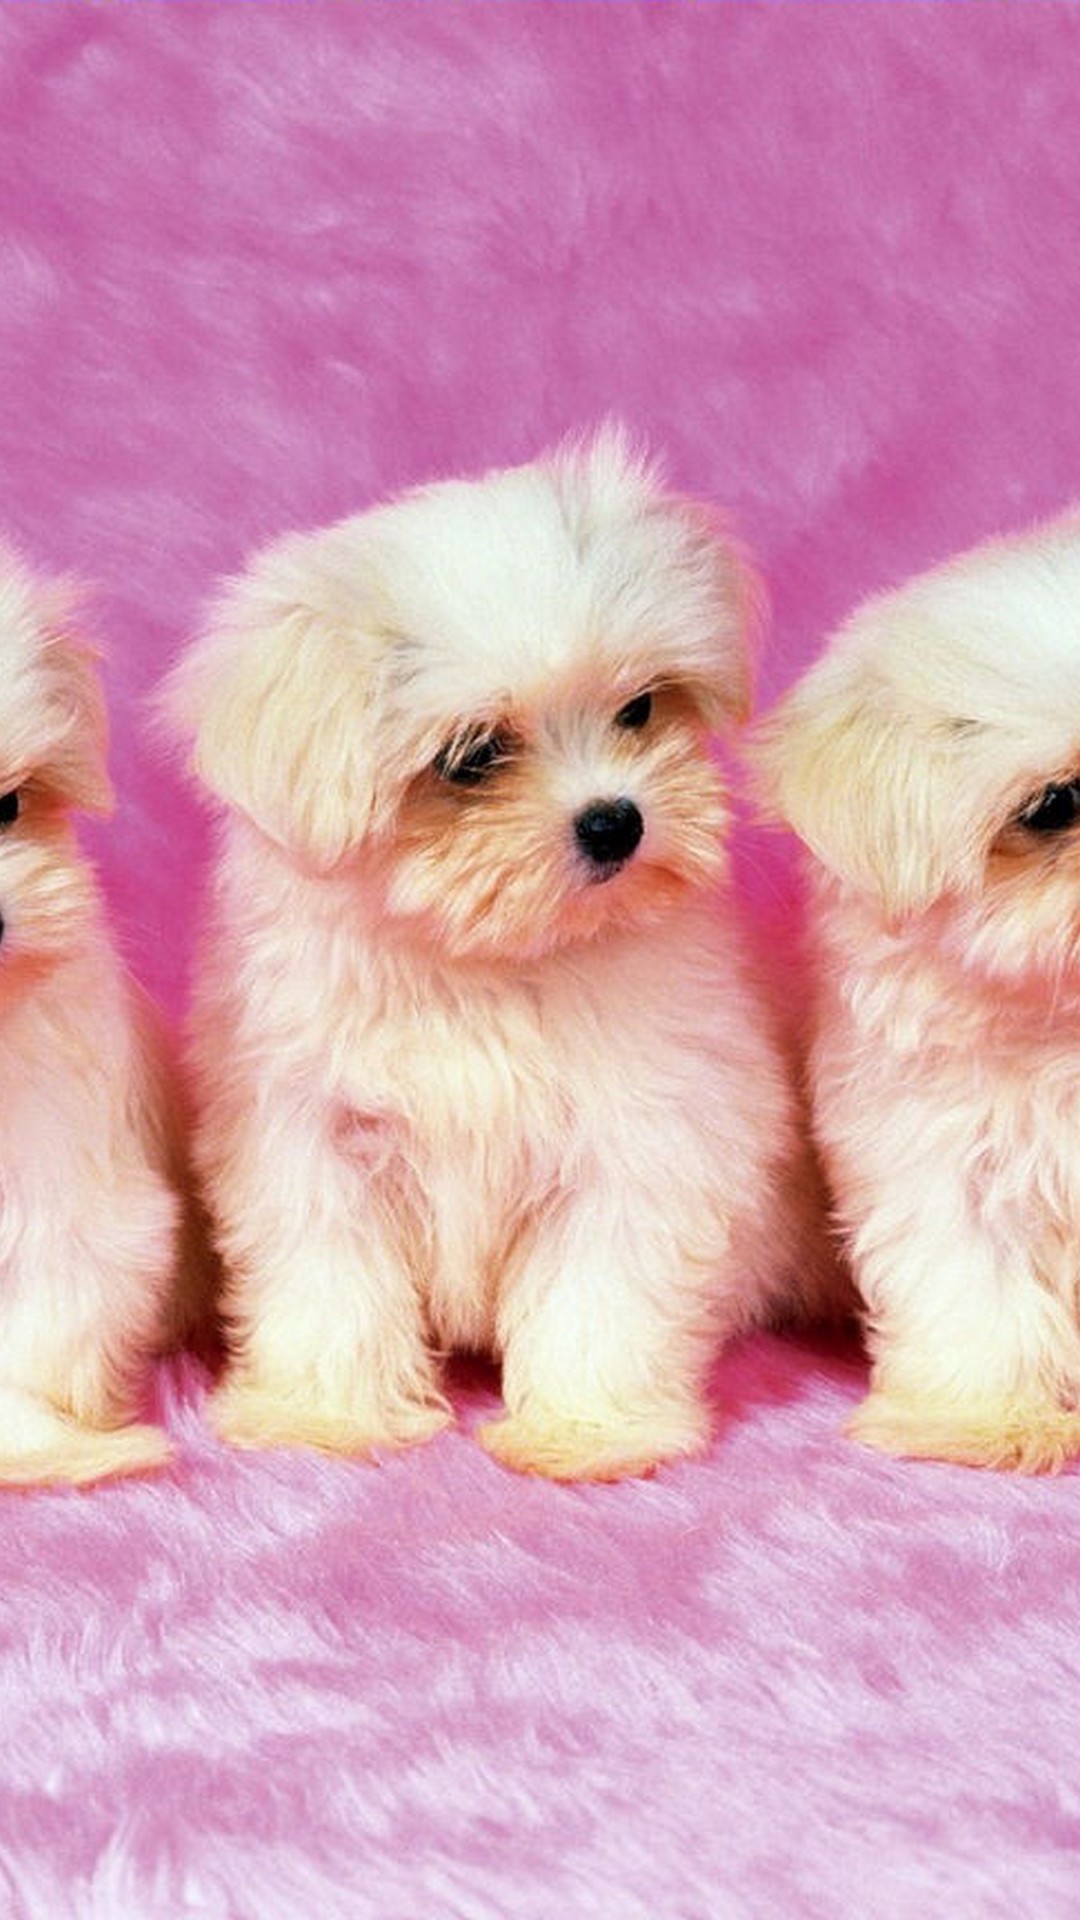 Funny Puppies Android Wallpaper with HD resolution 1080x1920